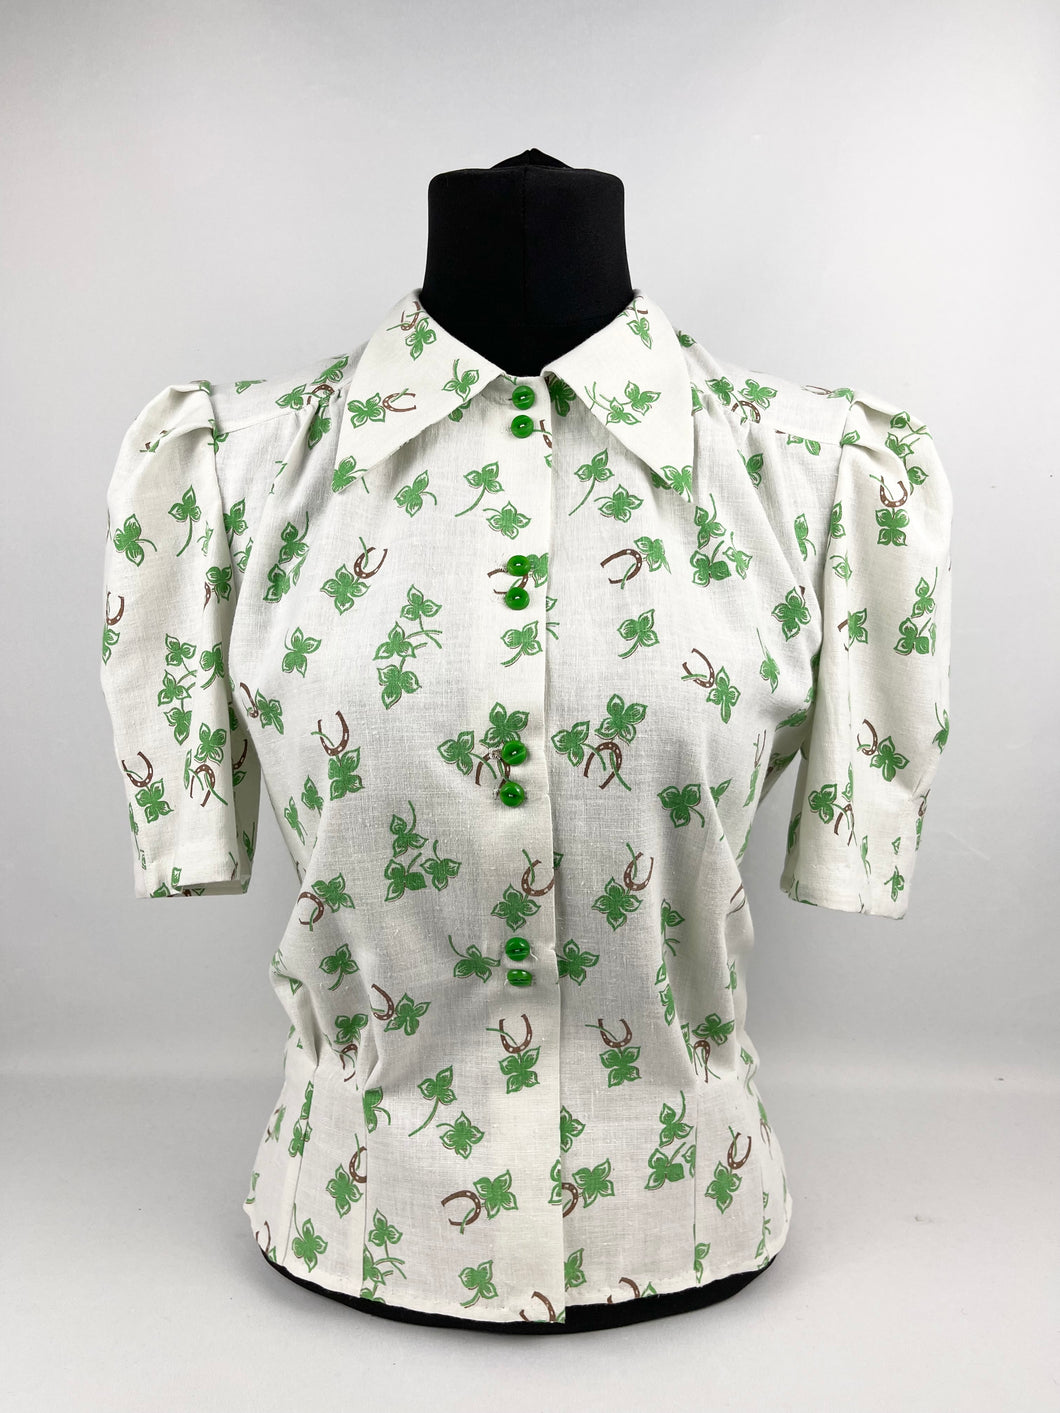 1940s Reproduction Novelty Print Feed Sack Blouse of Clover and Lucky Horseshoes - B34